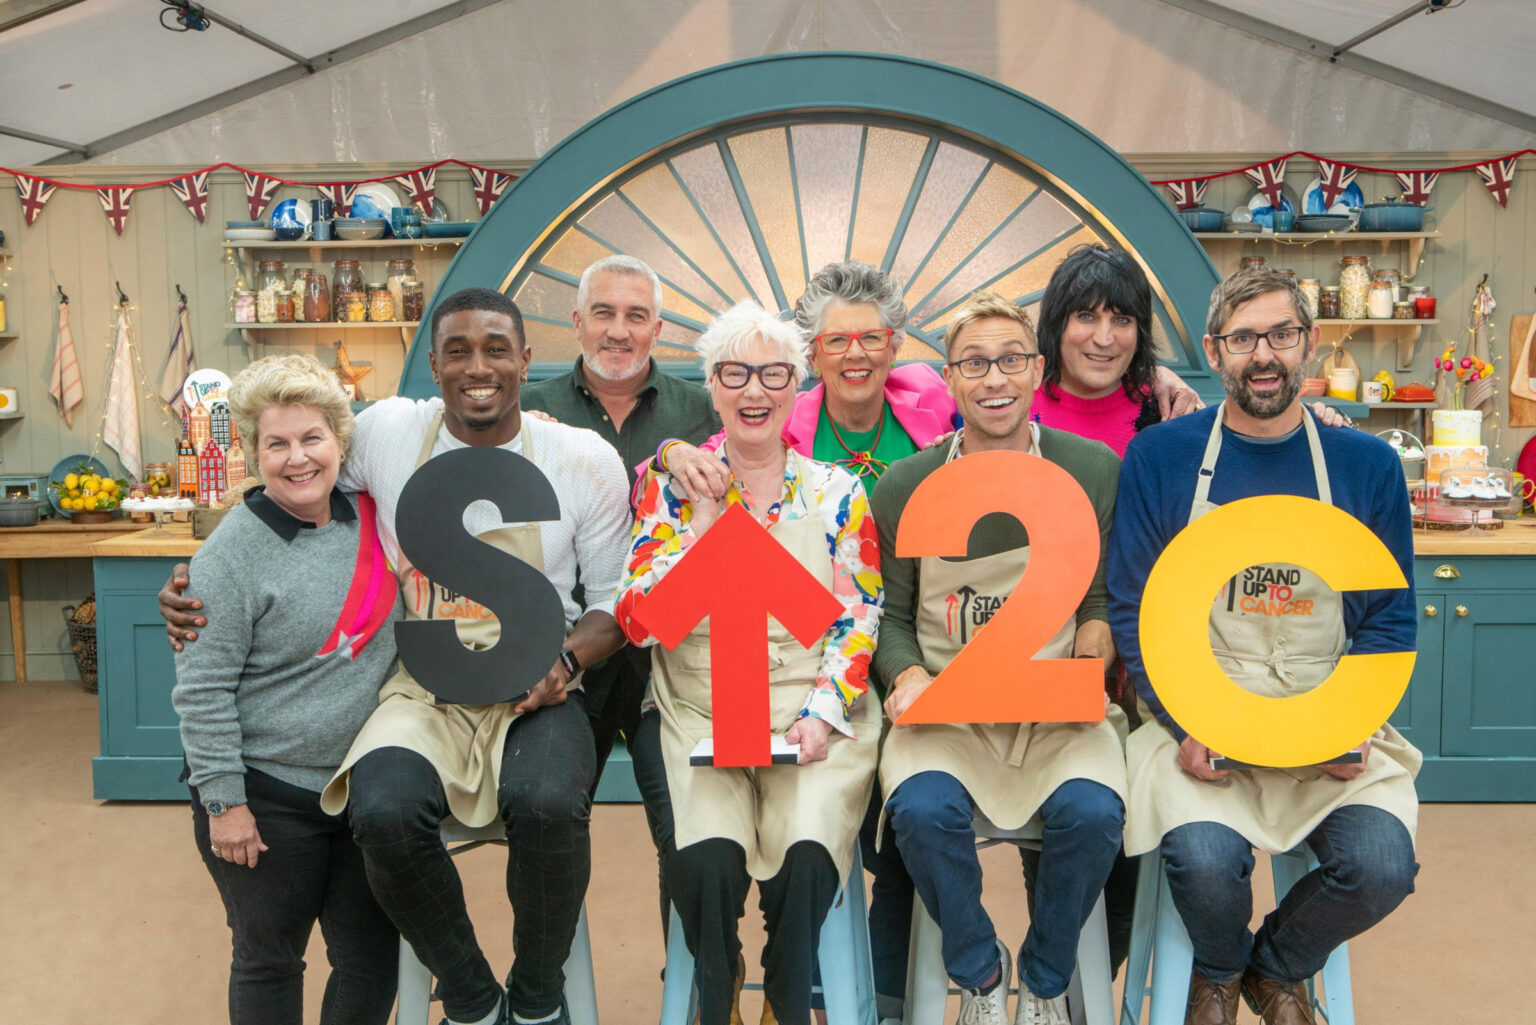 Did you think 'The Great British Baking Show' was gone in 2020? Think again! Discover new faces and upcoming changes to the beloved baking show.